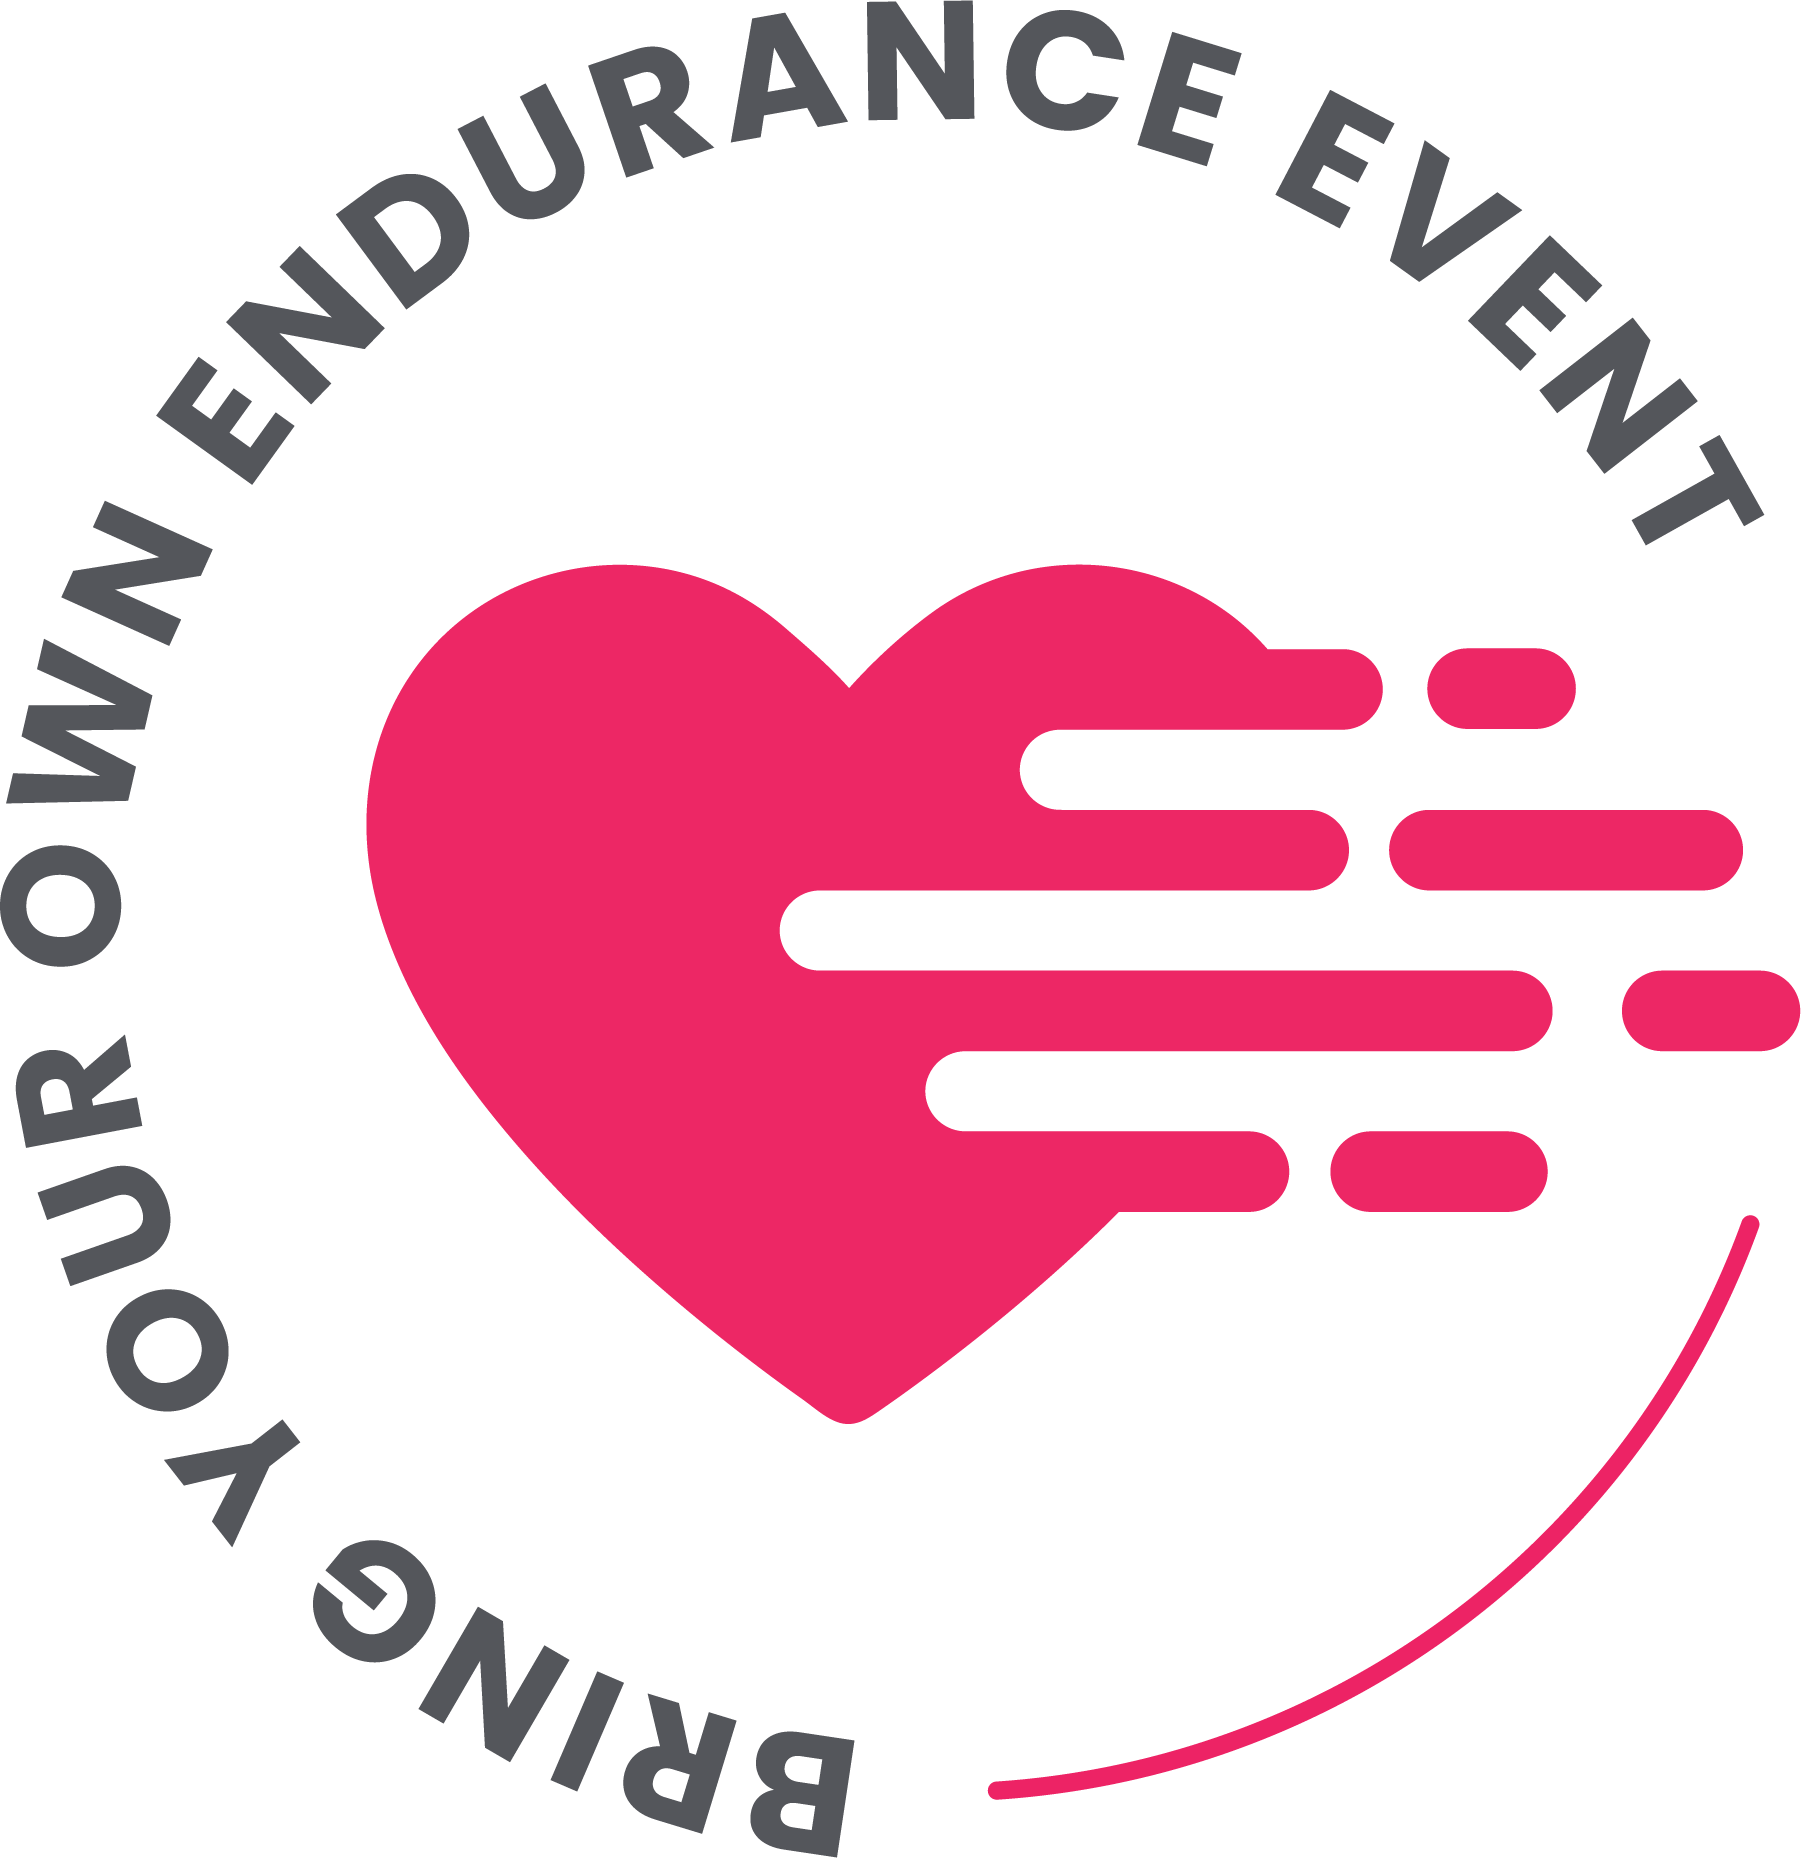 Build-Your-Own-Endurance-Event-Logo.png